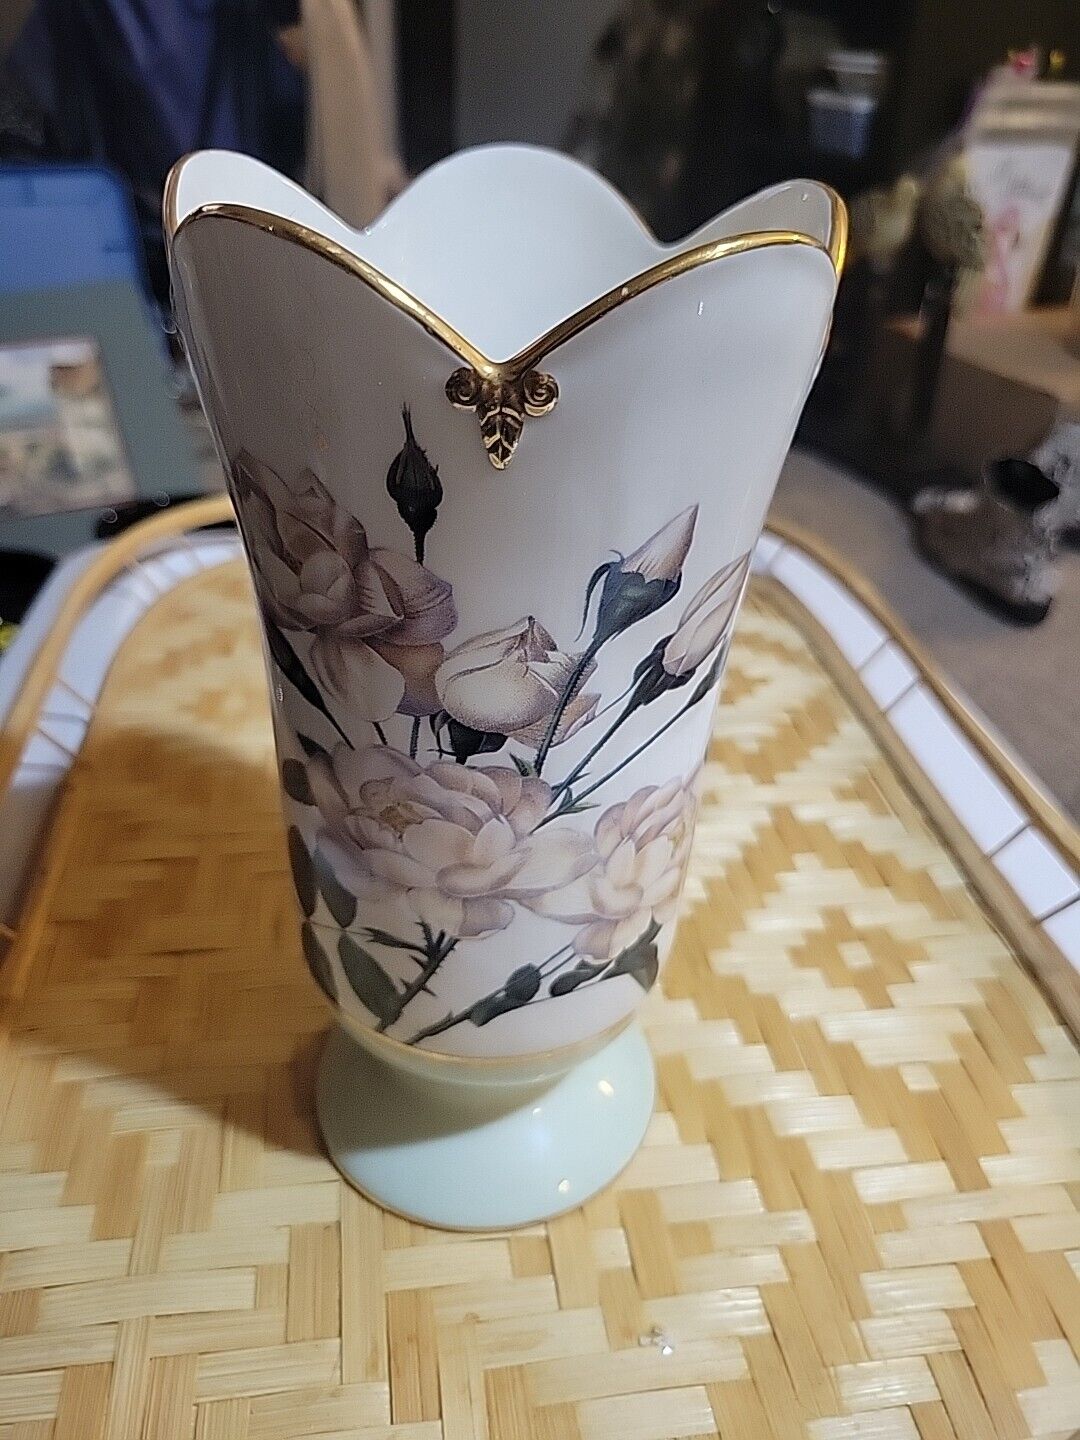 Smithsonian Collection Pedestal Vase by Goebel White Rose with Gold Trim